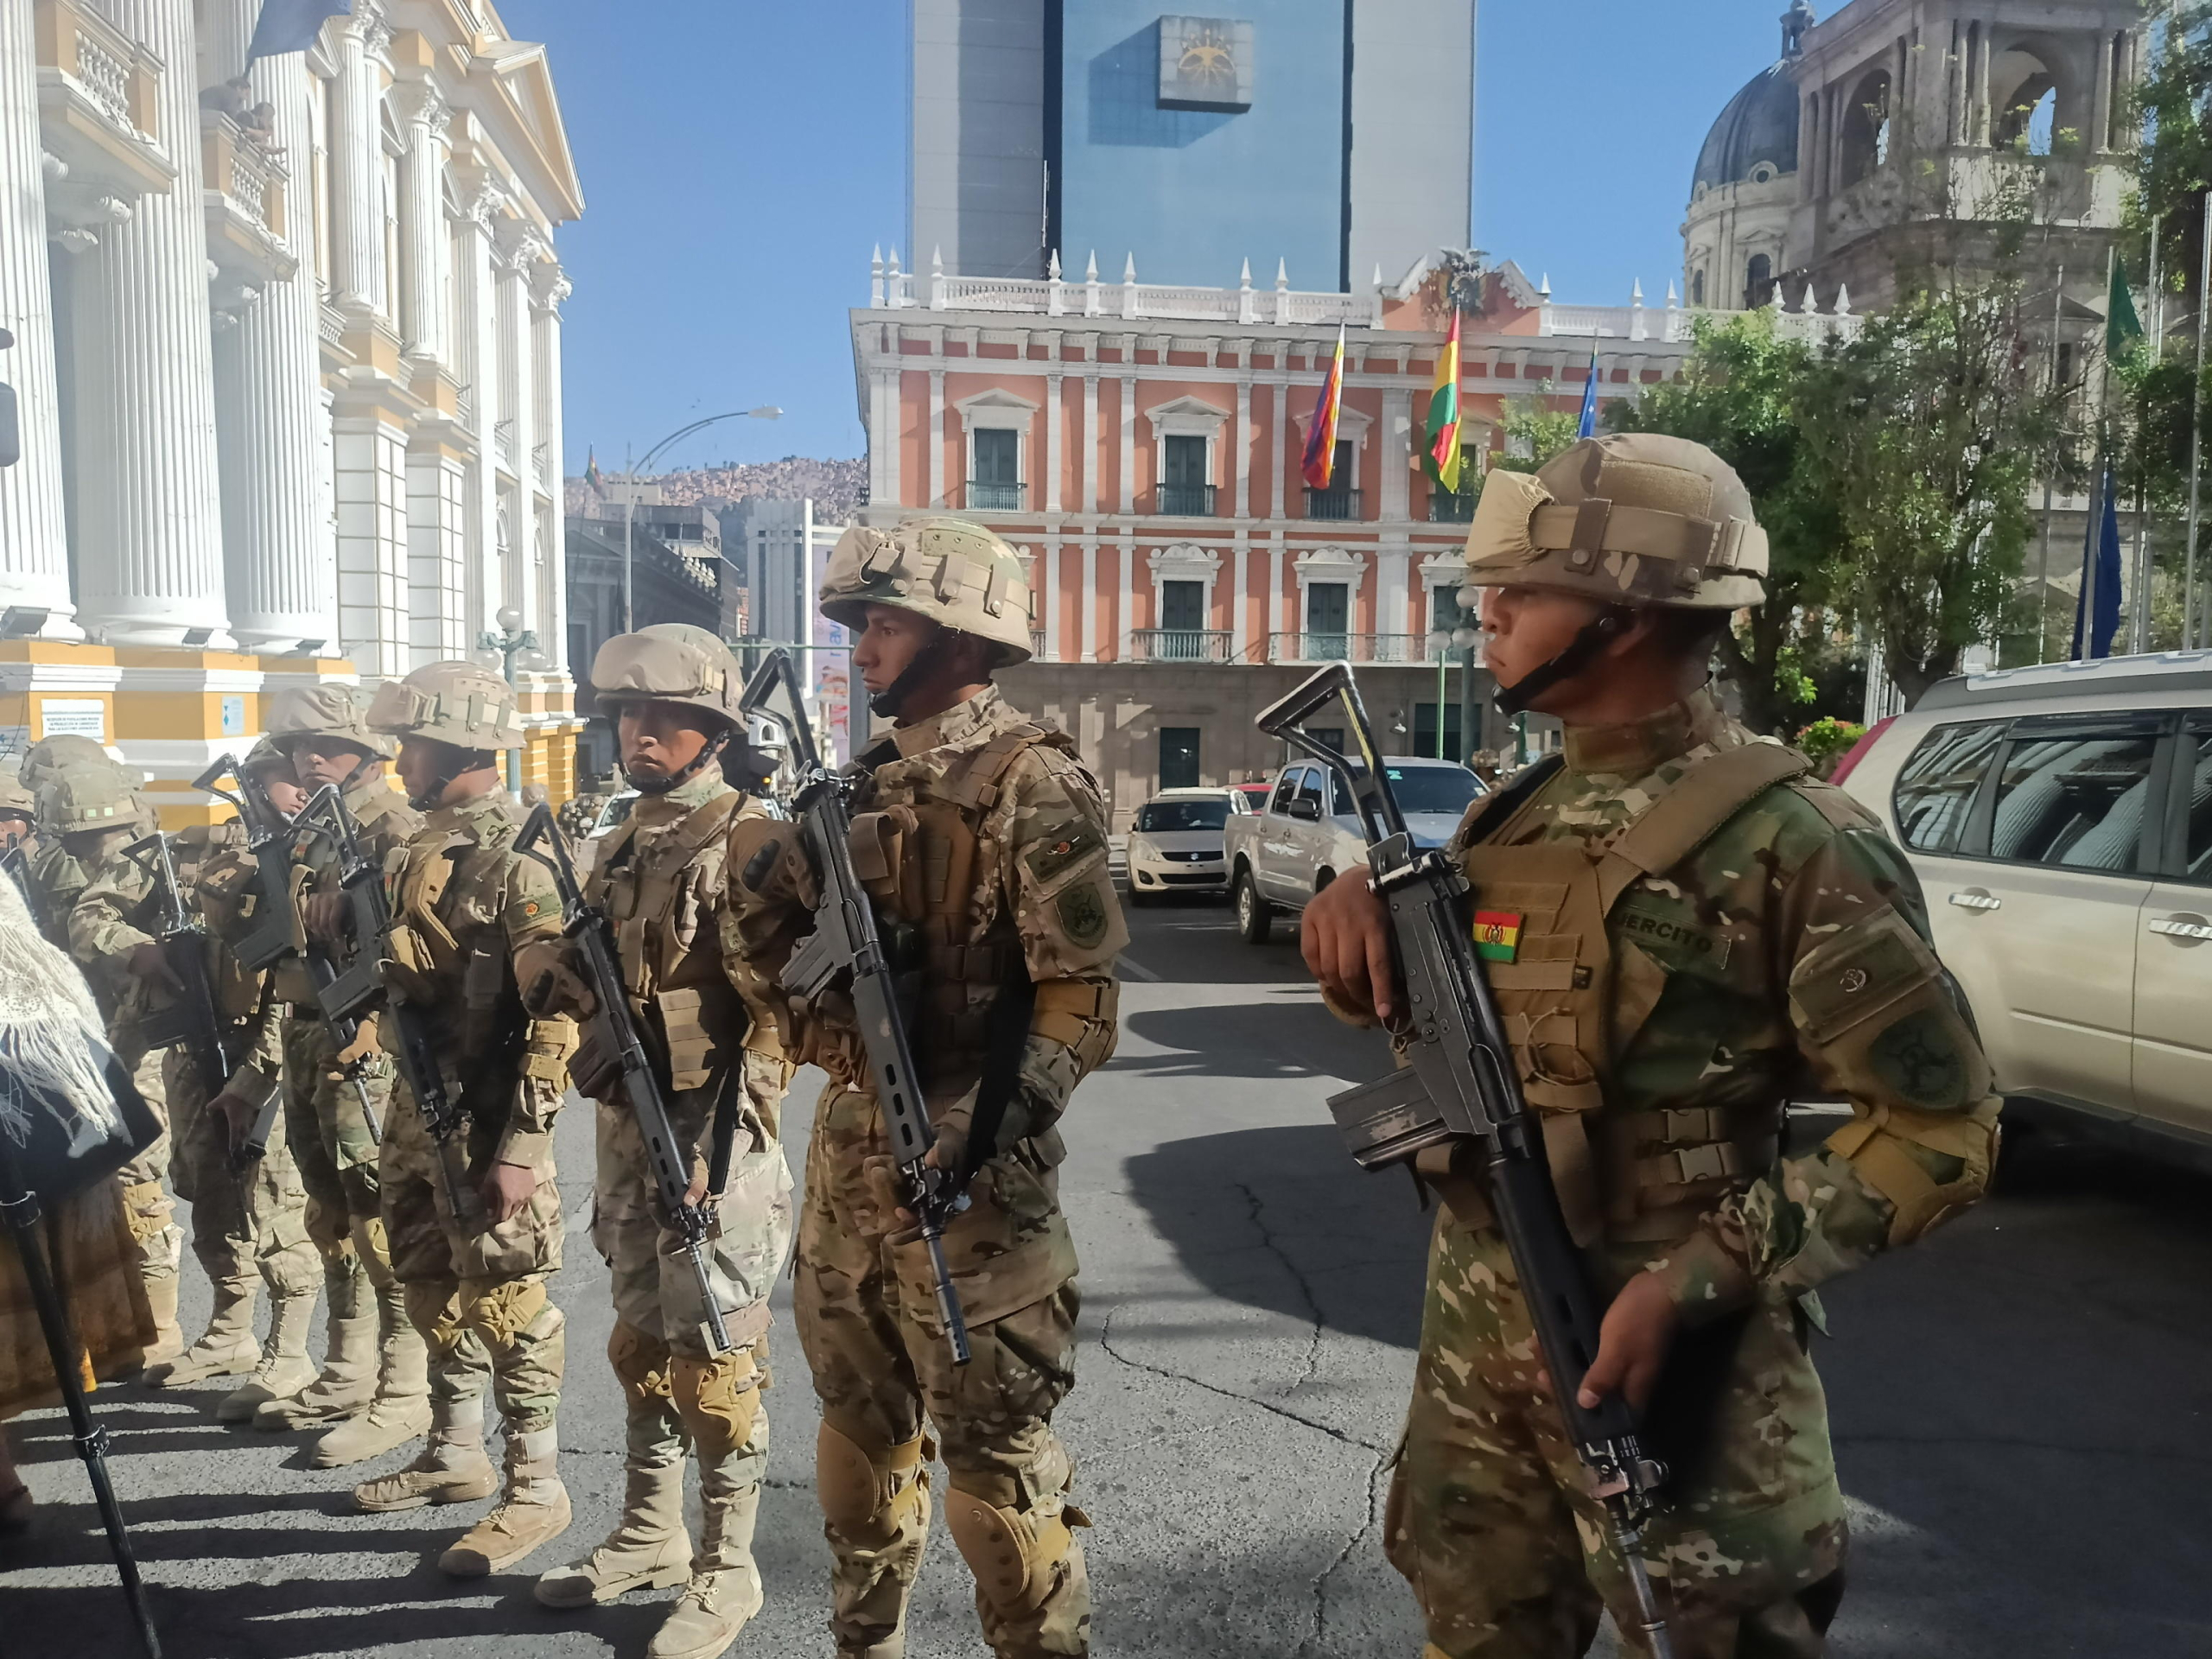 epa11440388 Military form up in front of Bolivia's government headquarters in La Paz, Bolivia, 26 June 2024. Bolivia's President Luis Arce denounced the 'irregular mobilization' of some units of the Bolivian military, he wrote in a post on social media. The vice president of Bolivia David Choquehuanca announced a 'coup d'etat' is taking place against the Government of Luis Arce, after a tank forcibly entered the Executive headquarters in the city of La Paz.  EPA/Luis Gandarillas